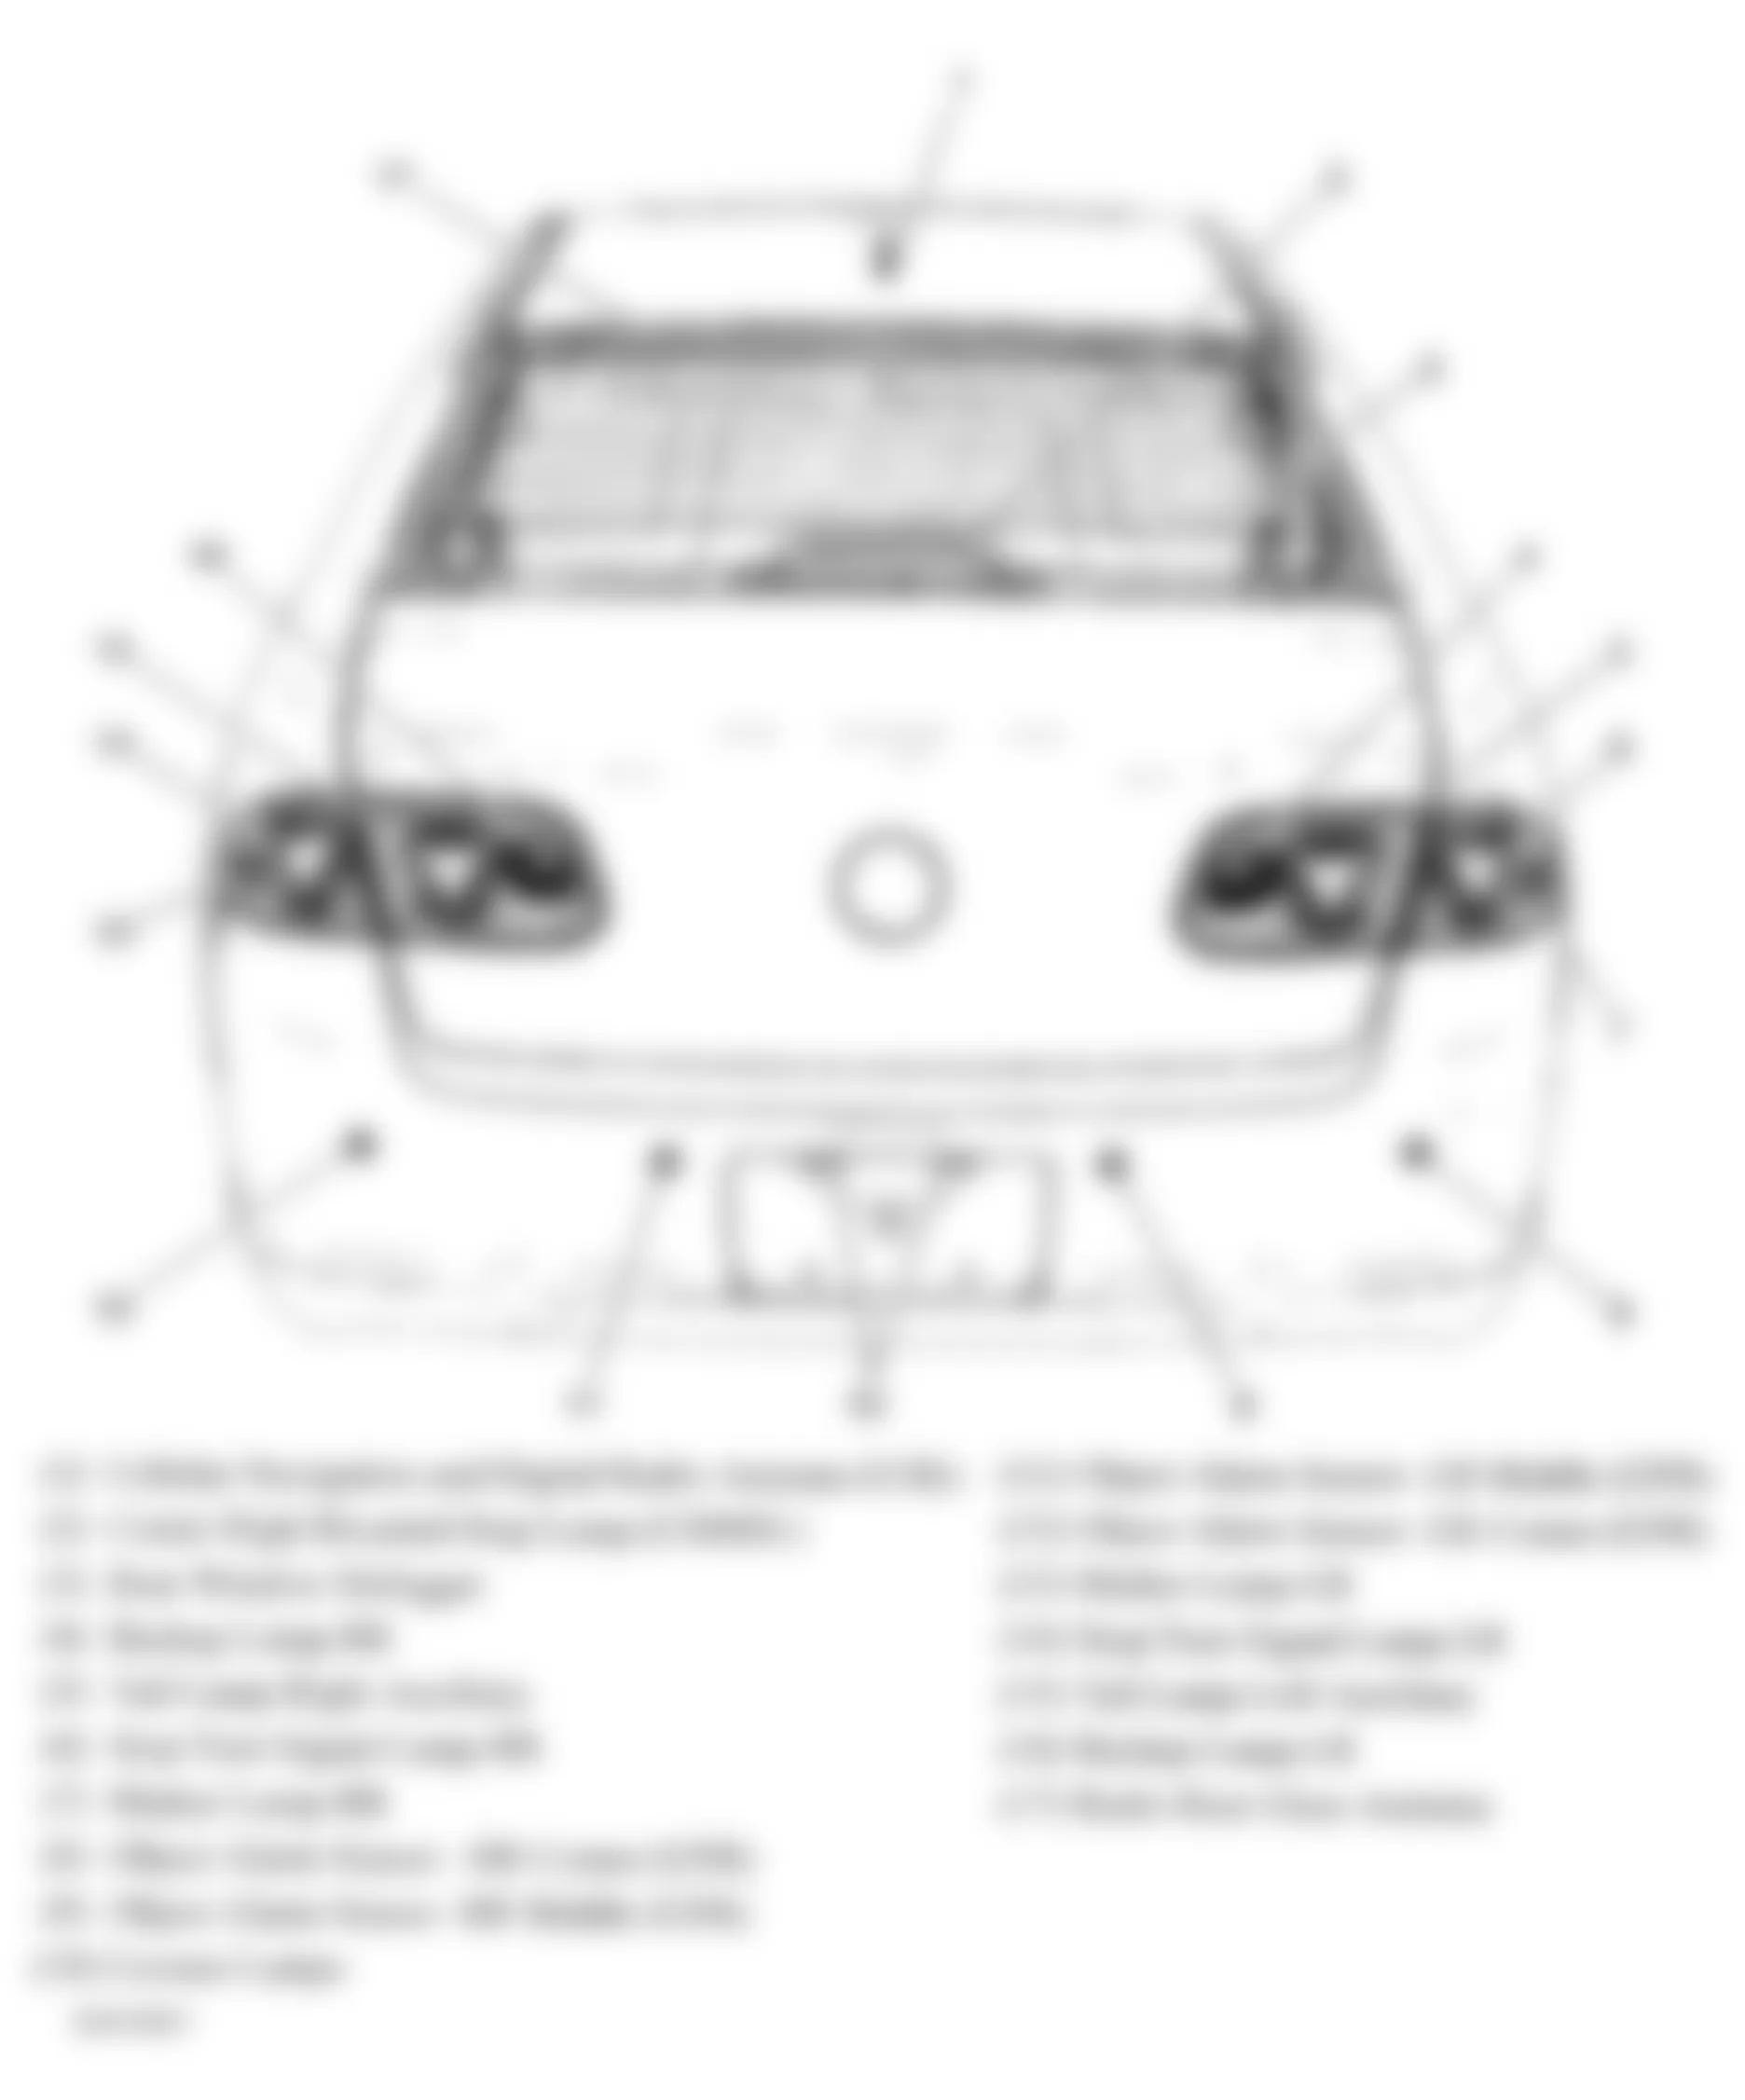 Buick Lucerne CX 2008 - Component Locations -  Rear Of Vehicle